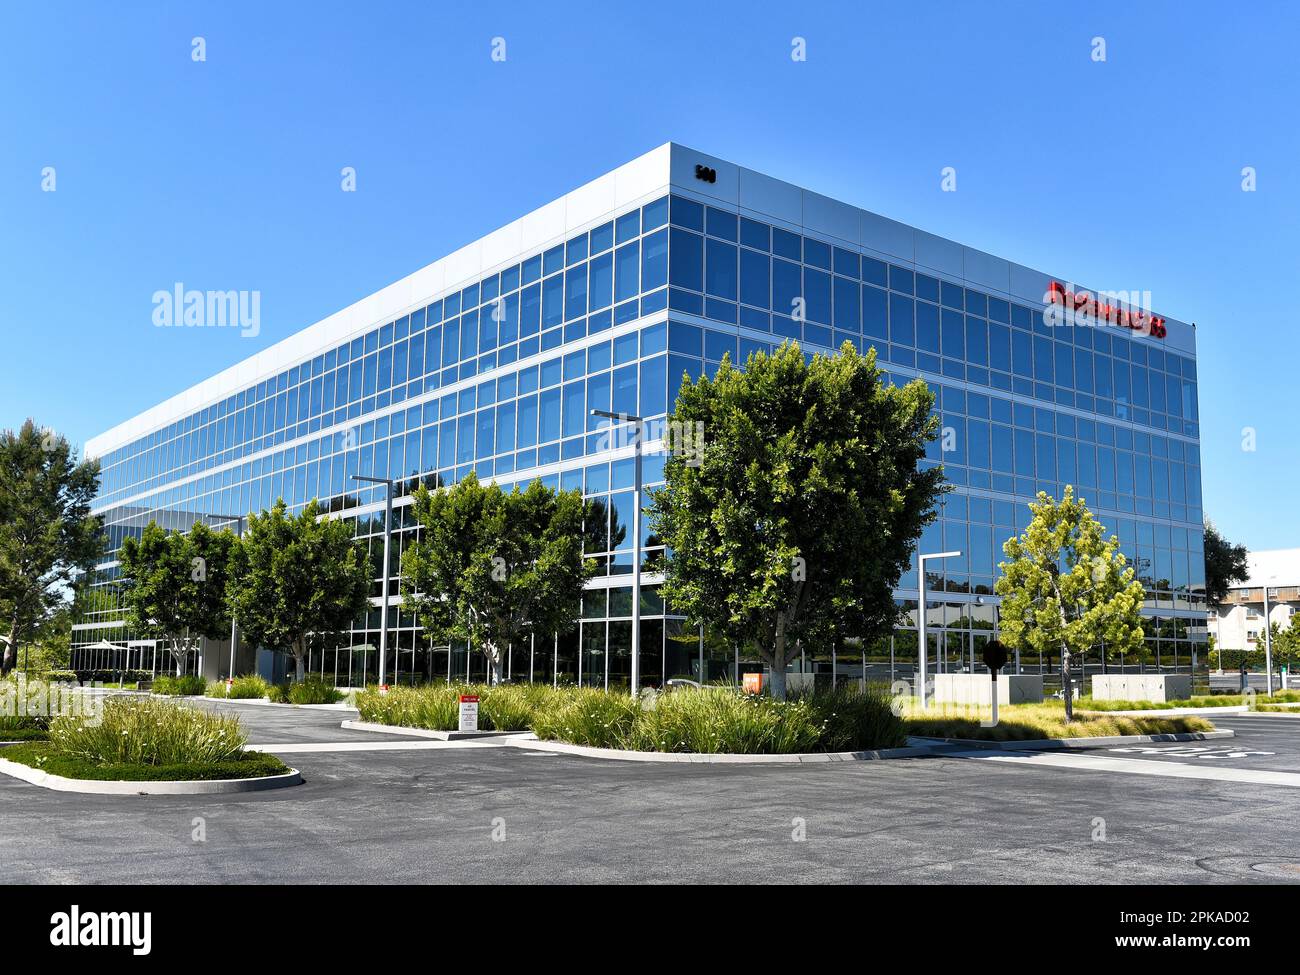 IRVINE, CALIFORNIA - 2 APR 2023: The Restaurant365 building, the company offers cloud-based restaurant management software. Stock Photo